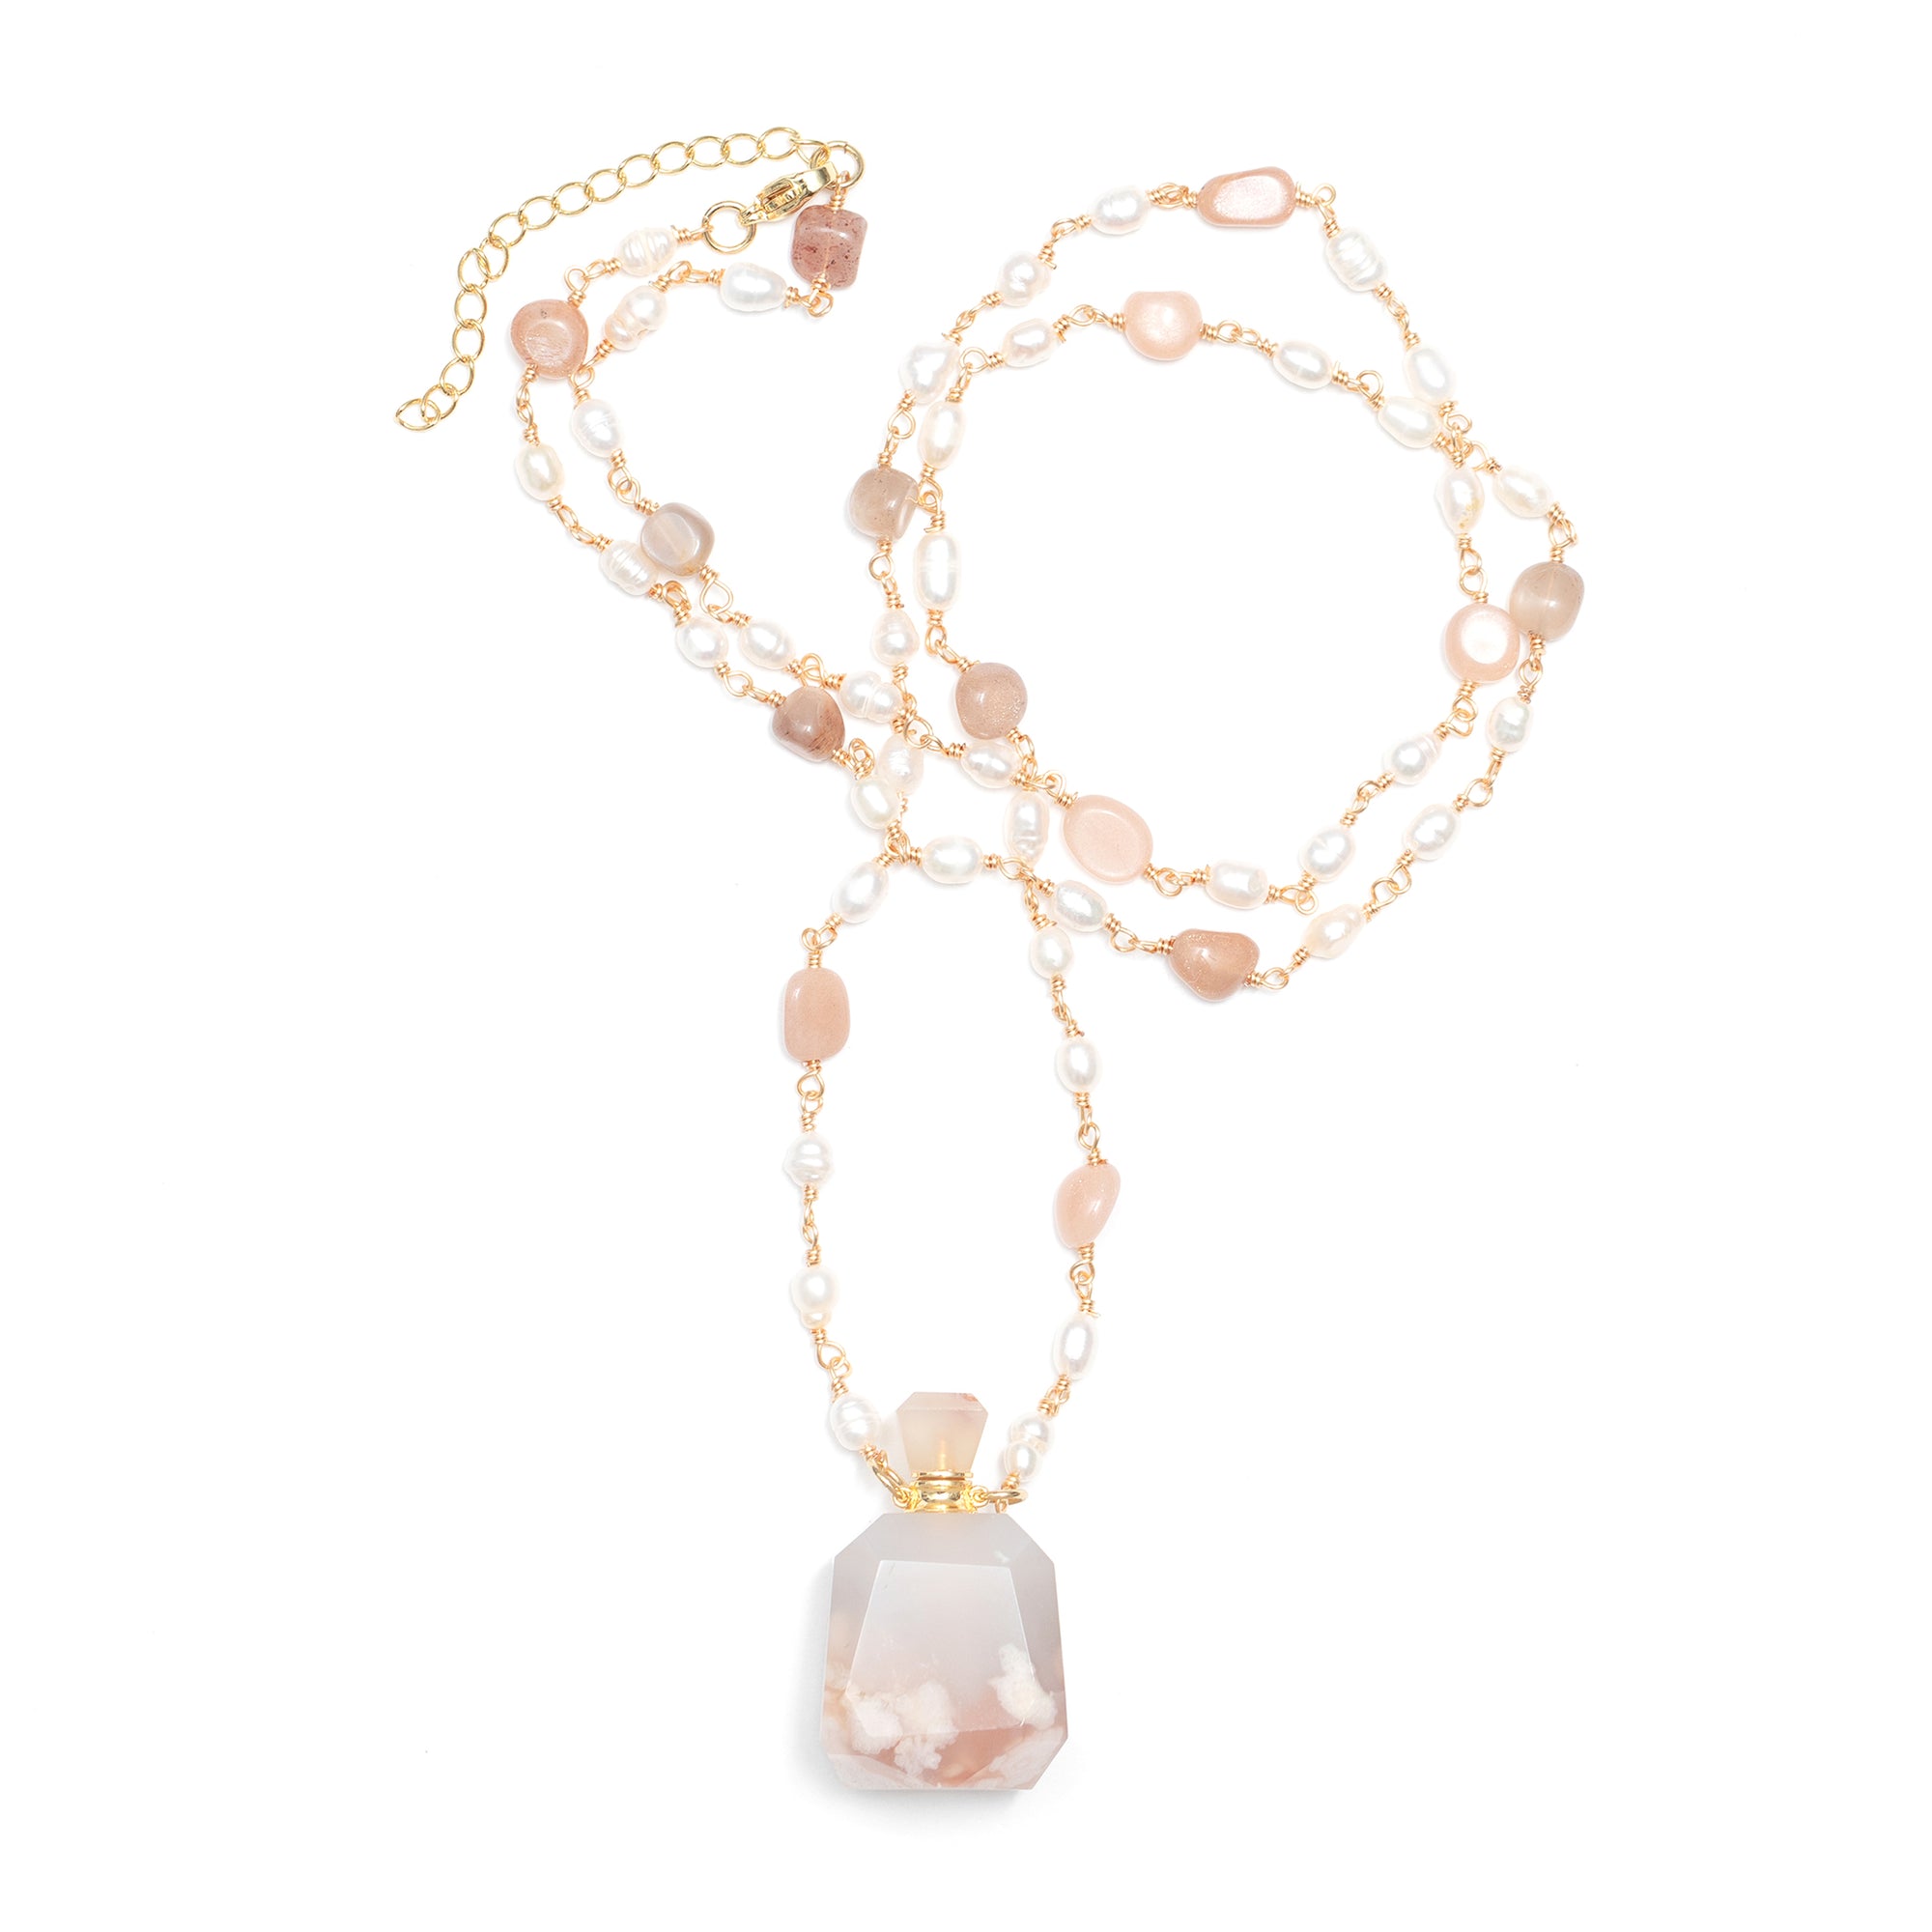 Necklace Sakura Agate Bottle with Bead and Pearl Chain